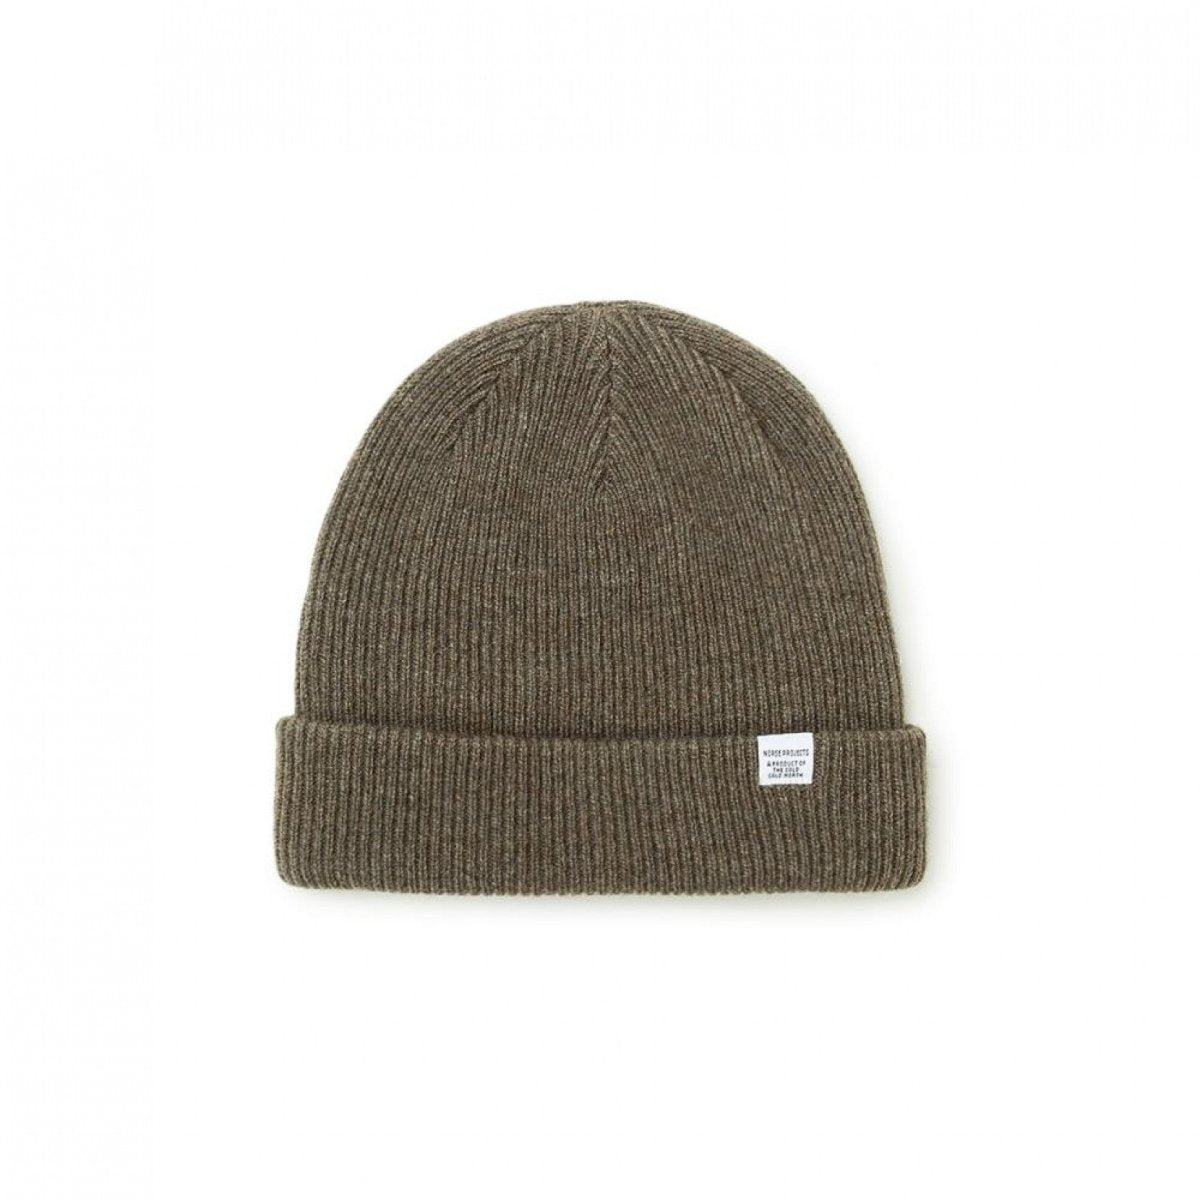 Norse Projects Beanie (Grün)  - Allike Store